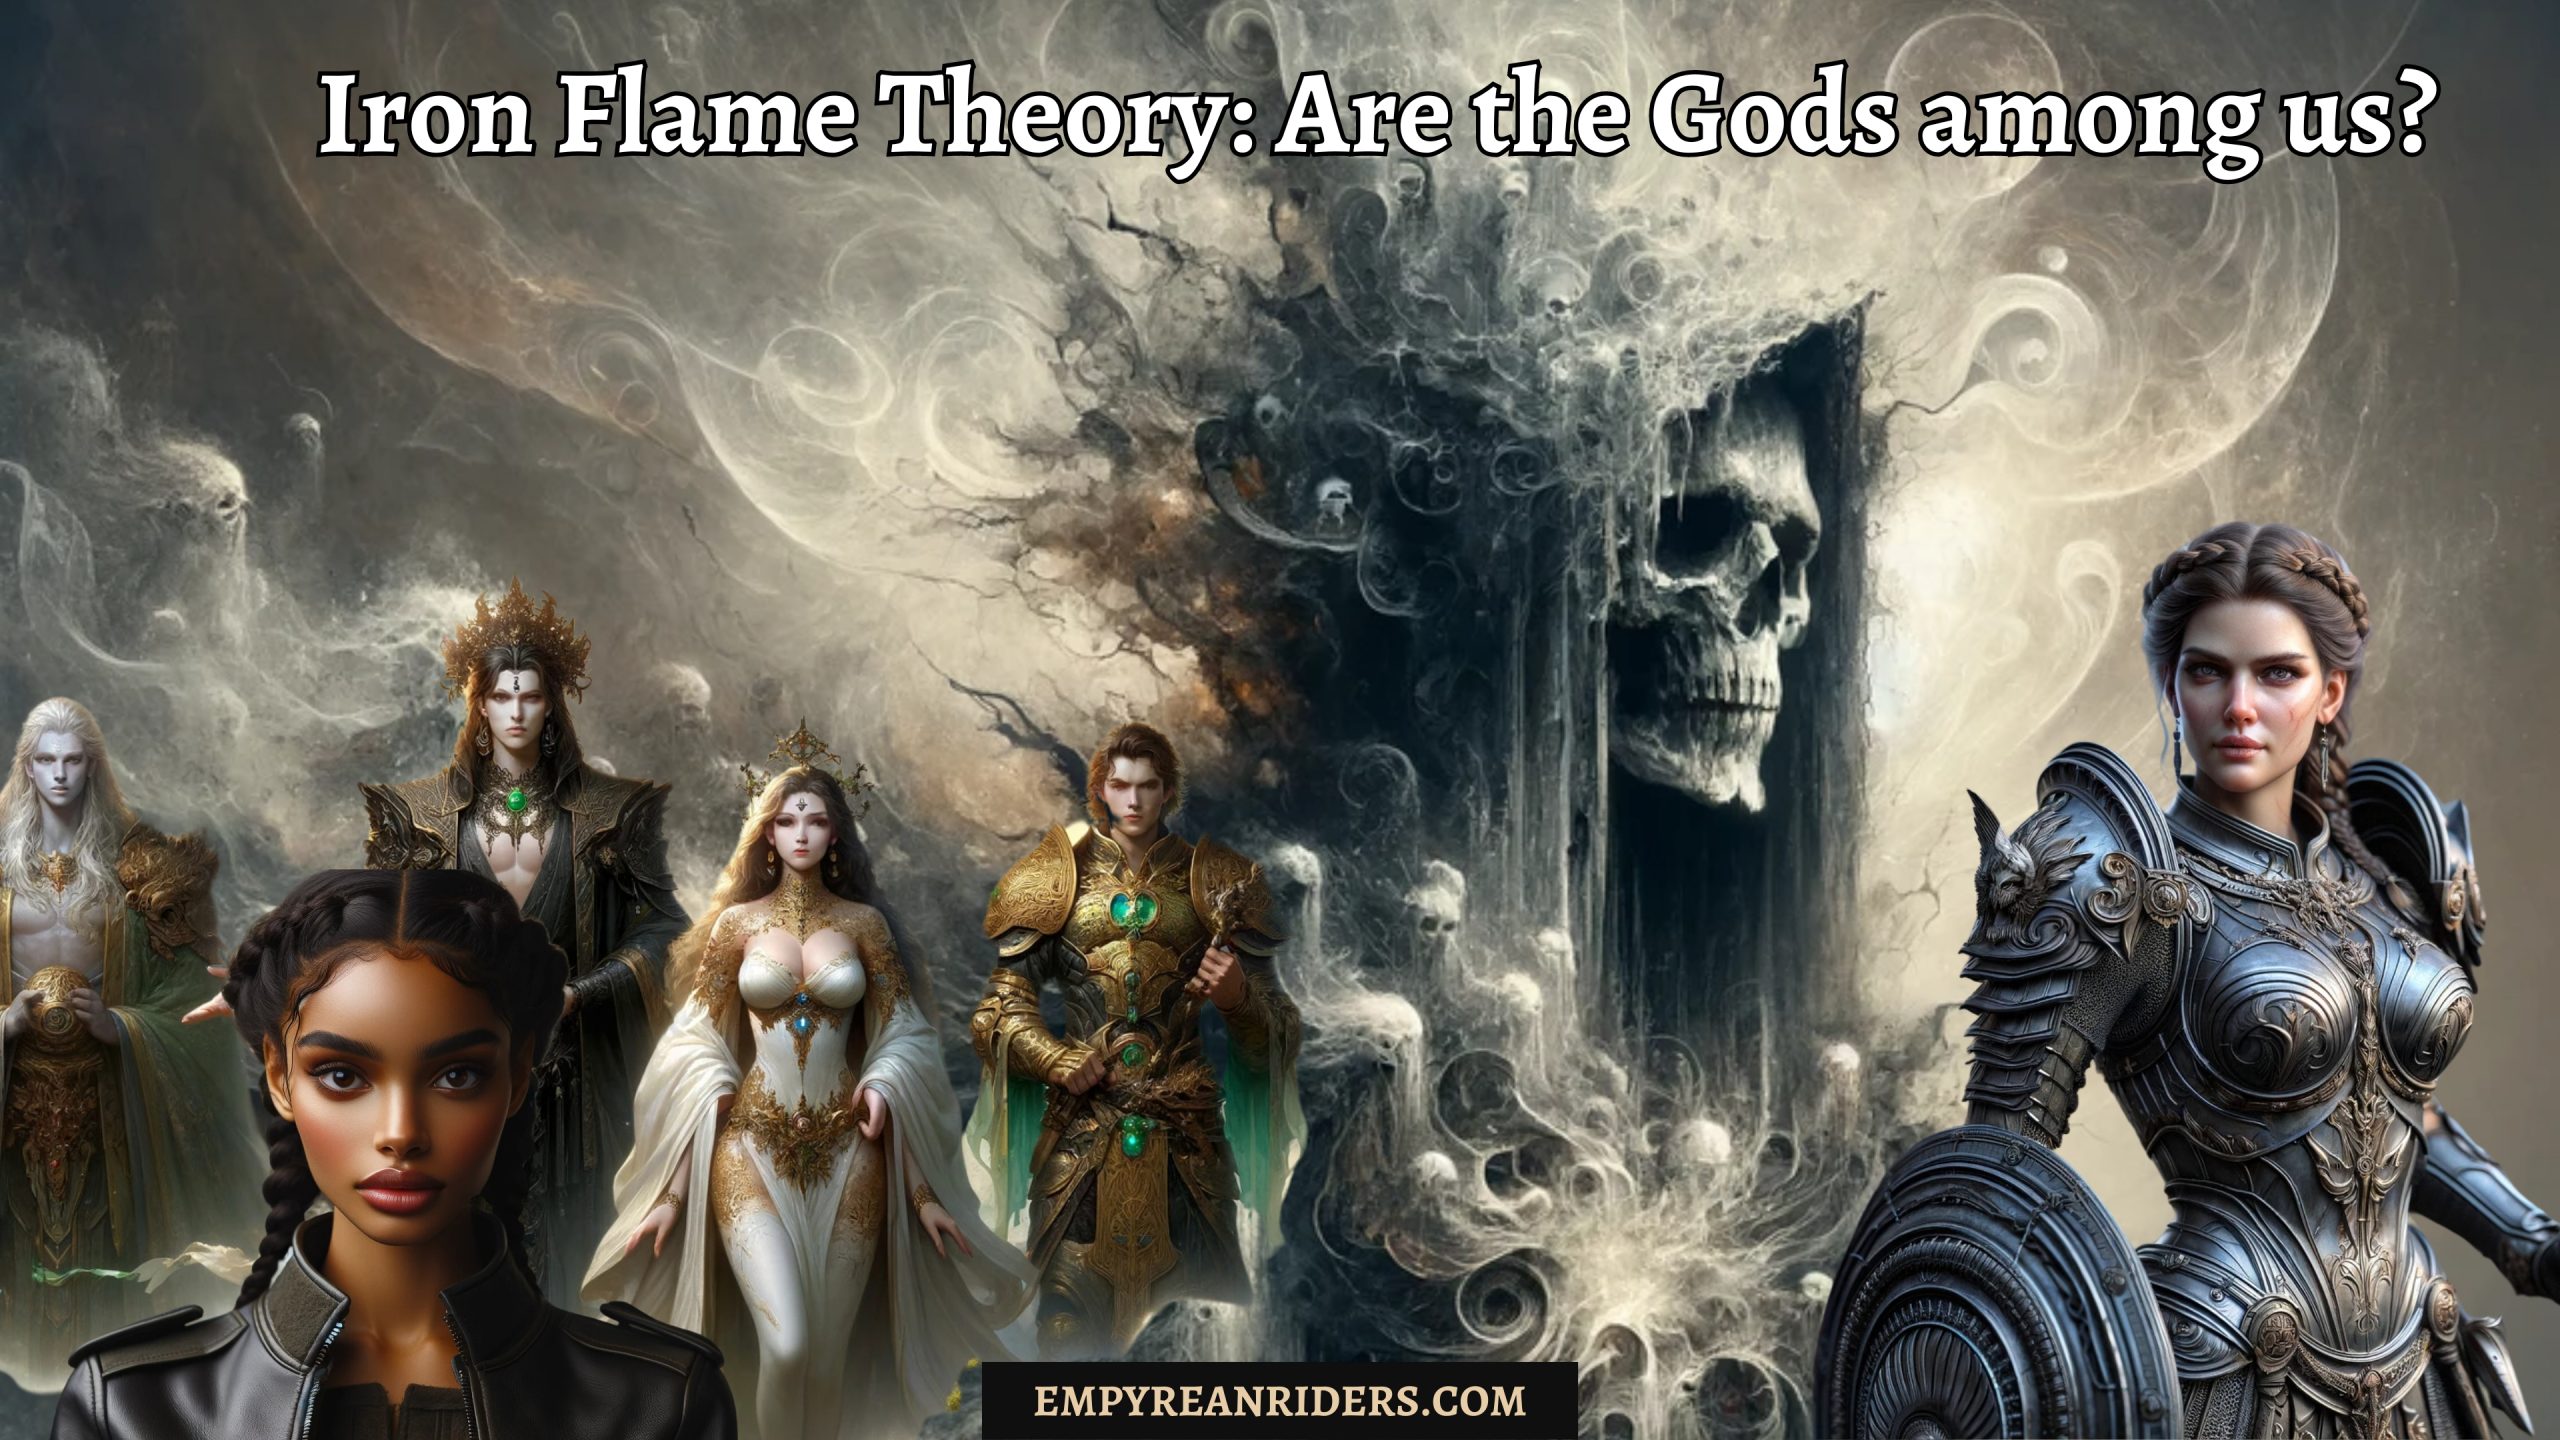 Iron Flame Theory: Are the Gods among us?